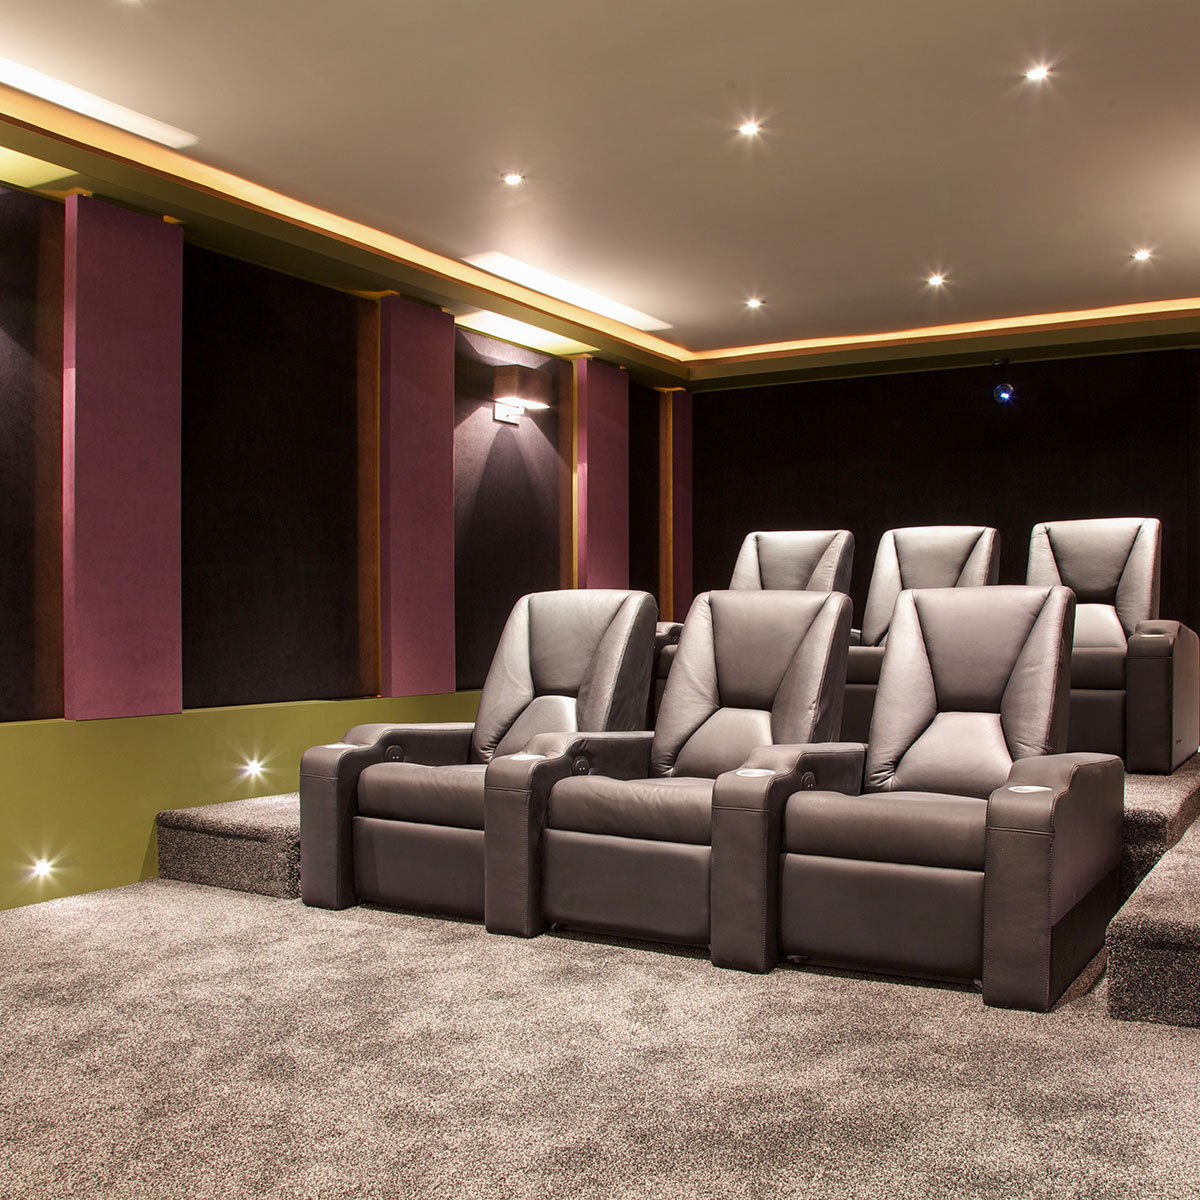 https://acousticalsolutions.com/wp-content/uploads/2015/01/cedia-honored-home-theater-05.jpg